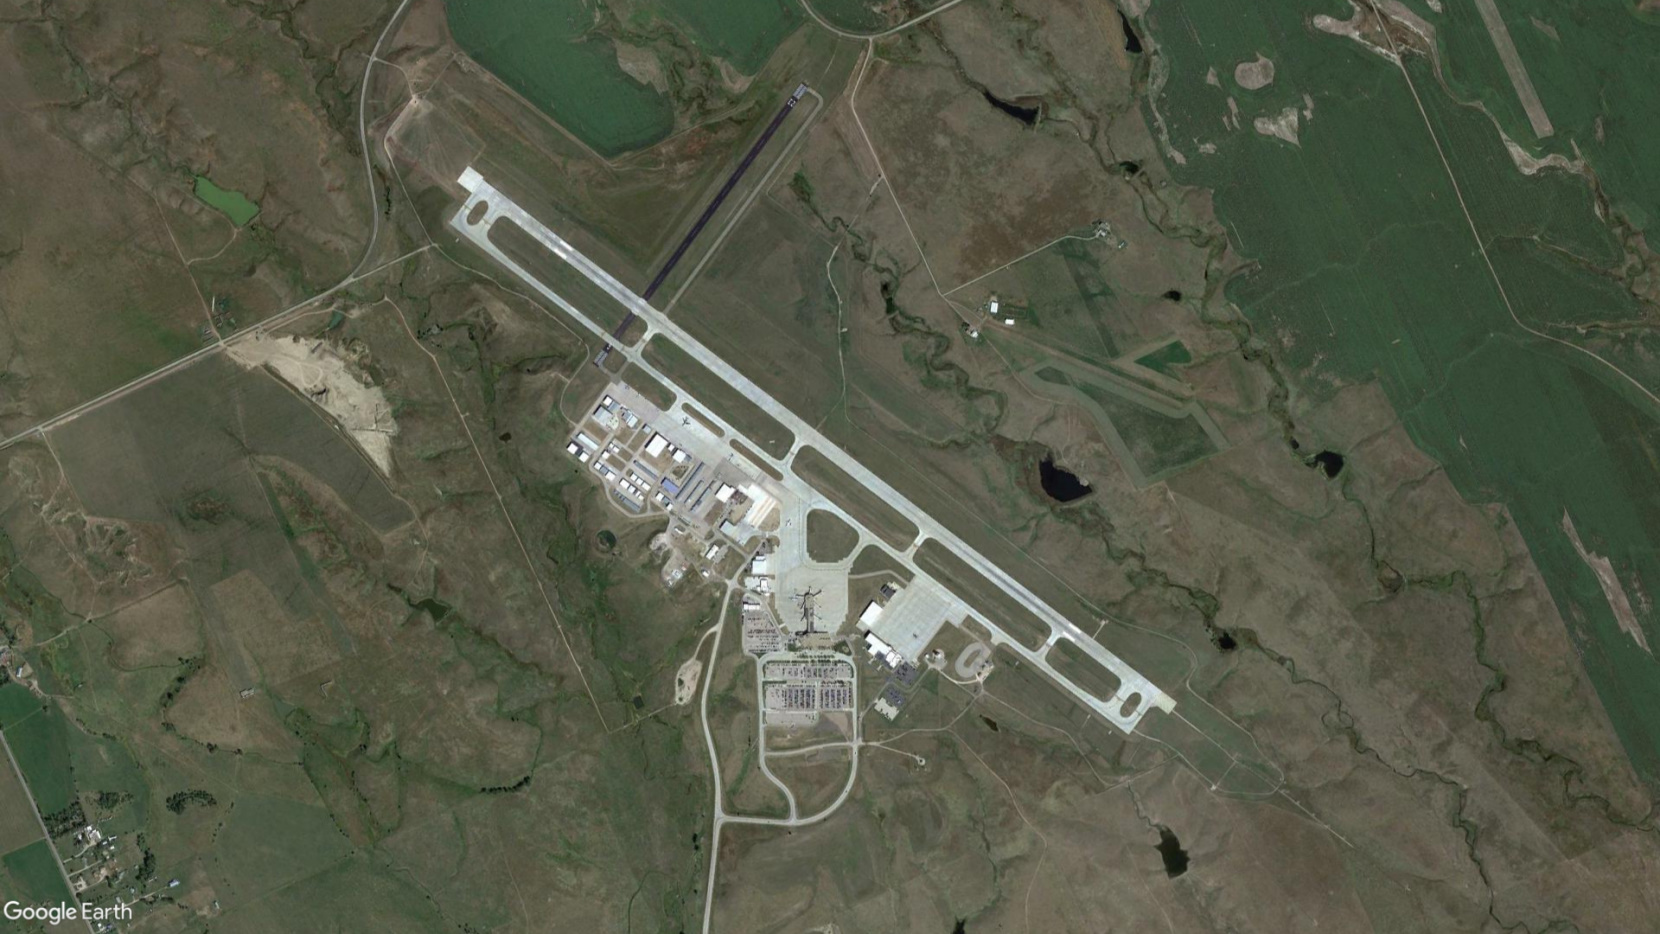 Google Earth imagery of the Rapid City airport.